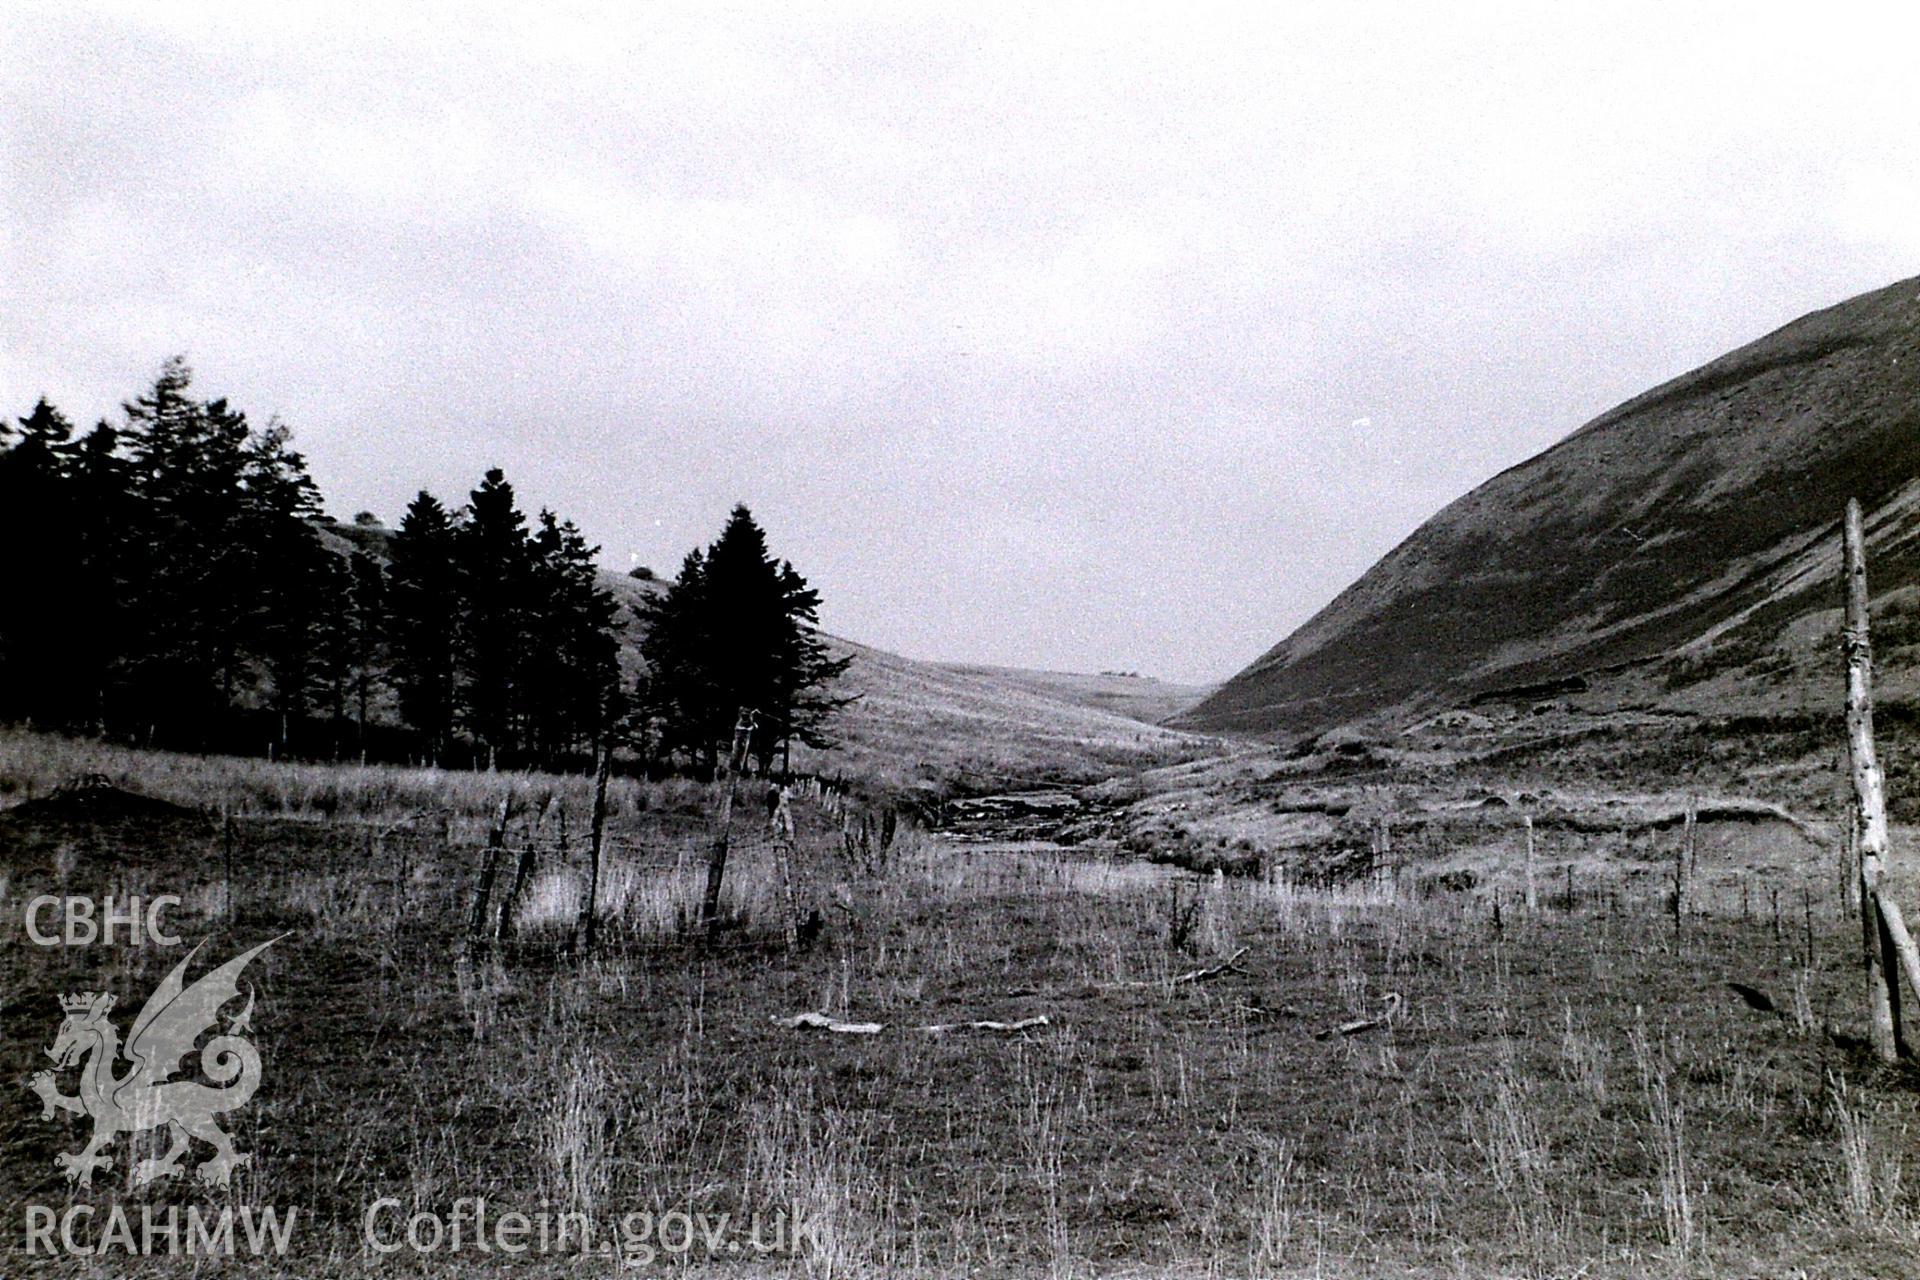 Digital copy of an image showing Aberbiga Farm, Clywedog taken September 1965 by Arthur ApSimon shortly before the flooding of the area.